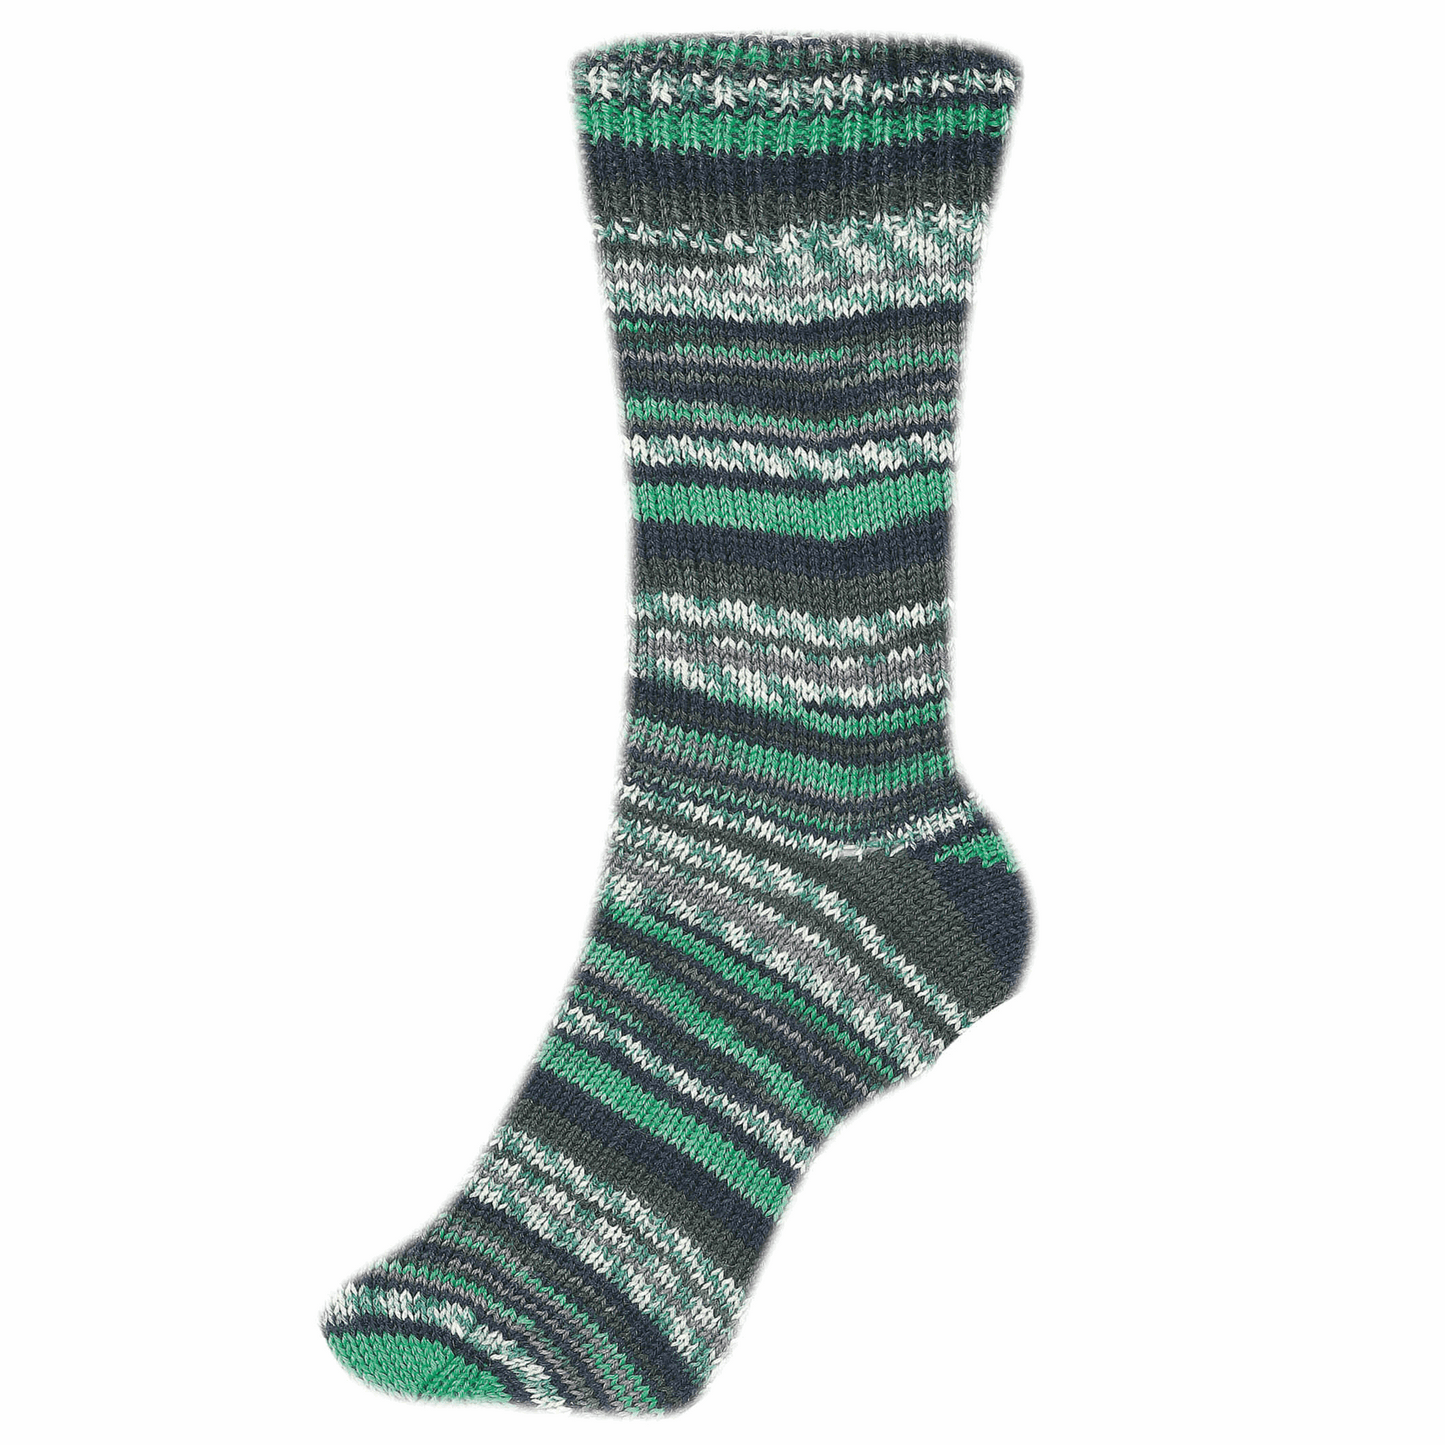 Fortissima socka 4-ply, 90028, color 2495, grass